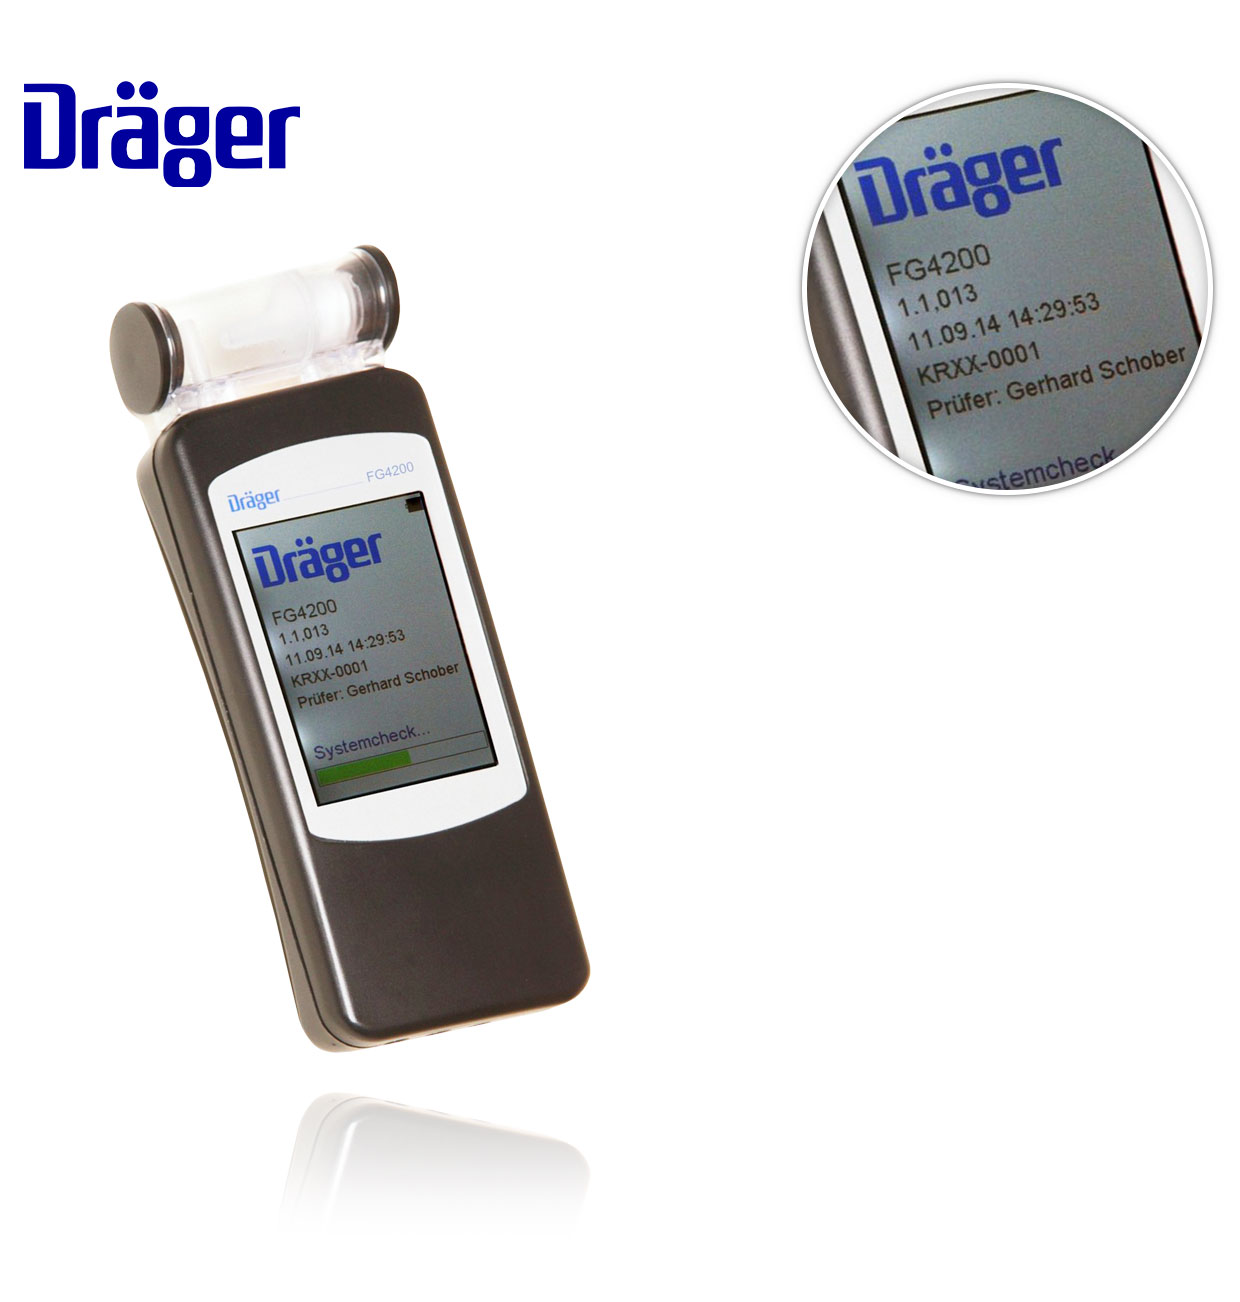 FG4200 DRÄGER COMBUSTION ANALYSER WITH PRINTER